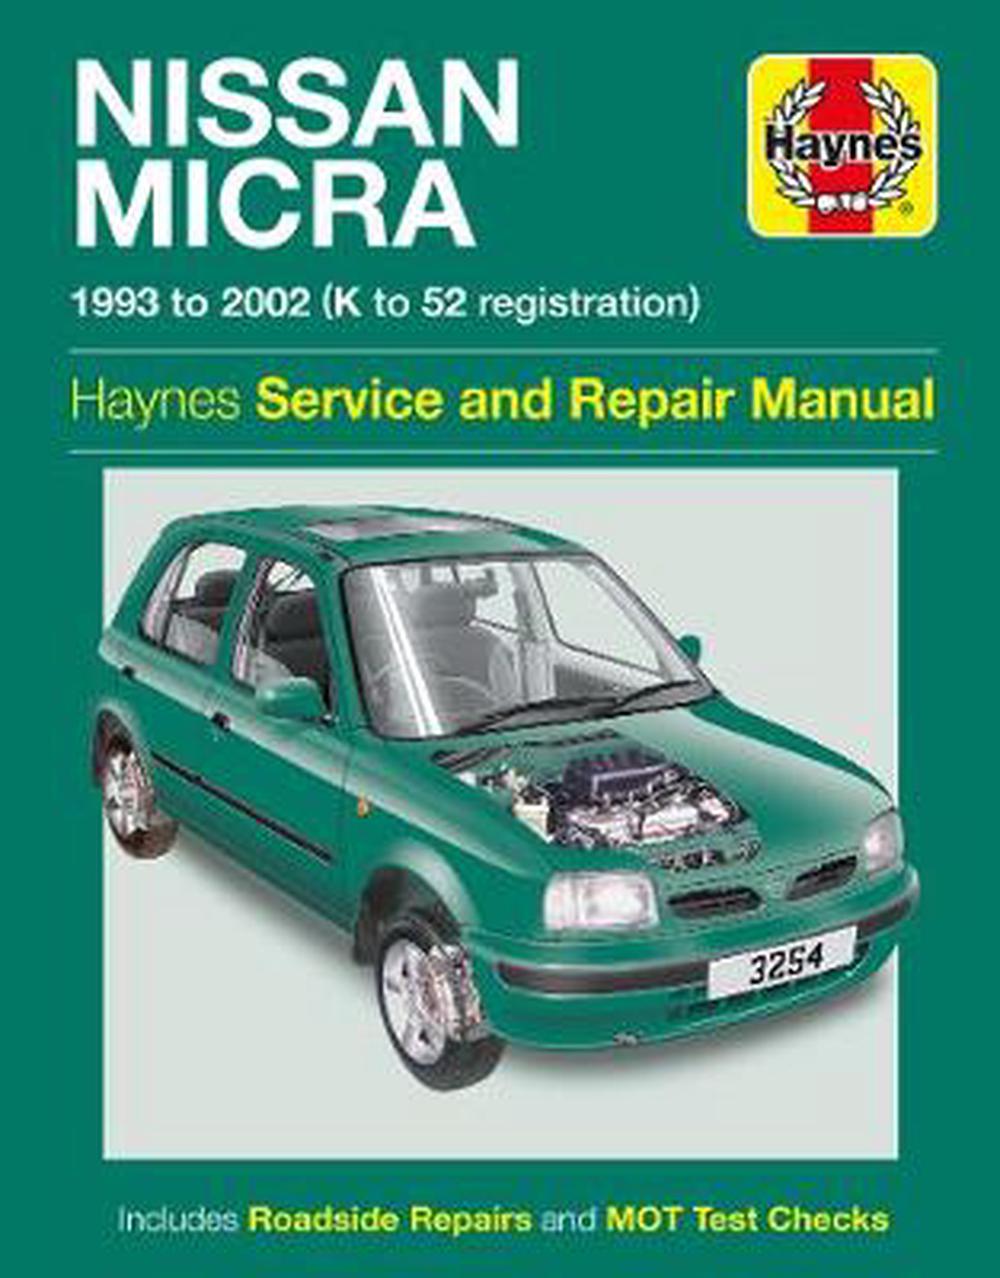 Nissan Micra Service and Repair Manual 9302 by Haynes Publishing (English) Pap 9781785212864